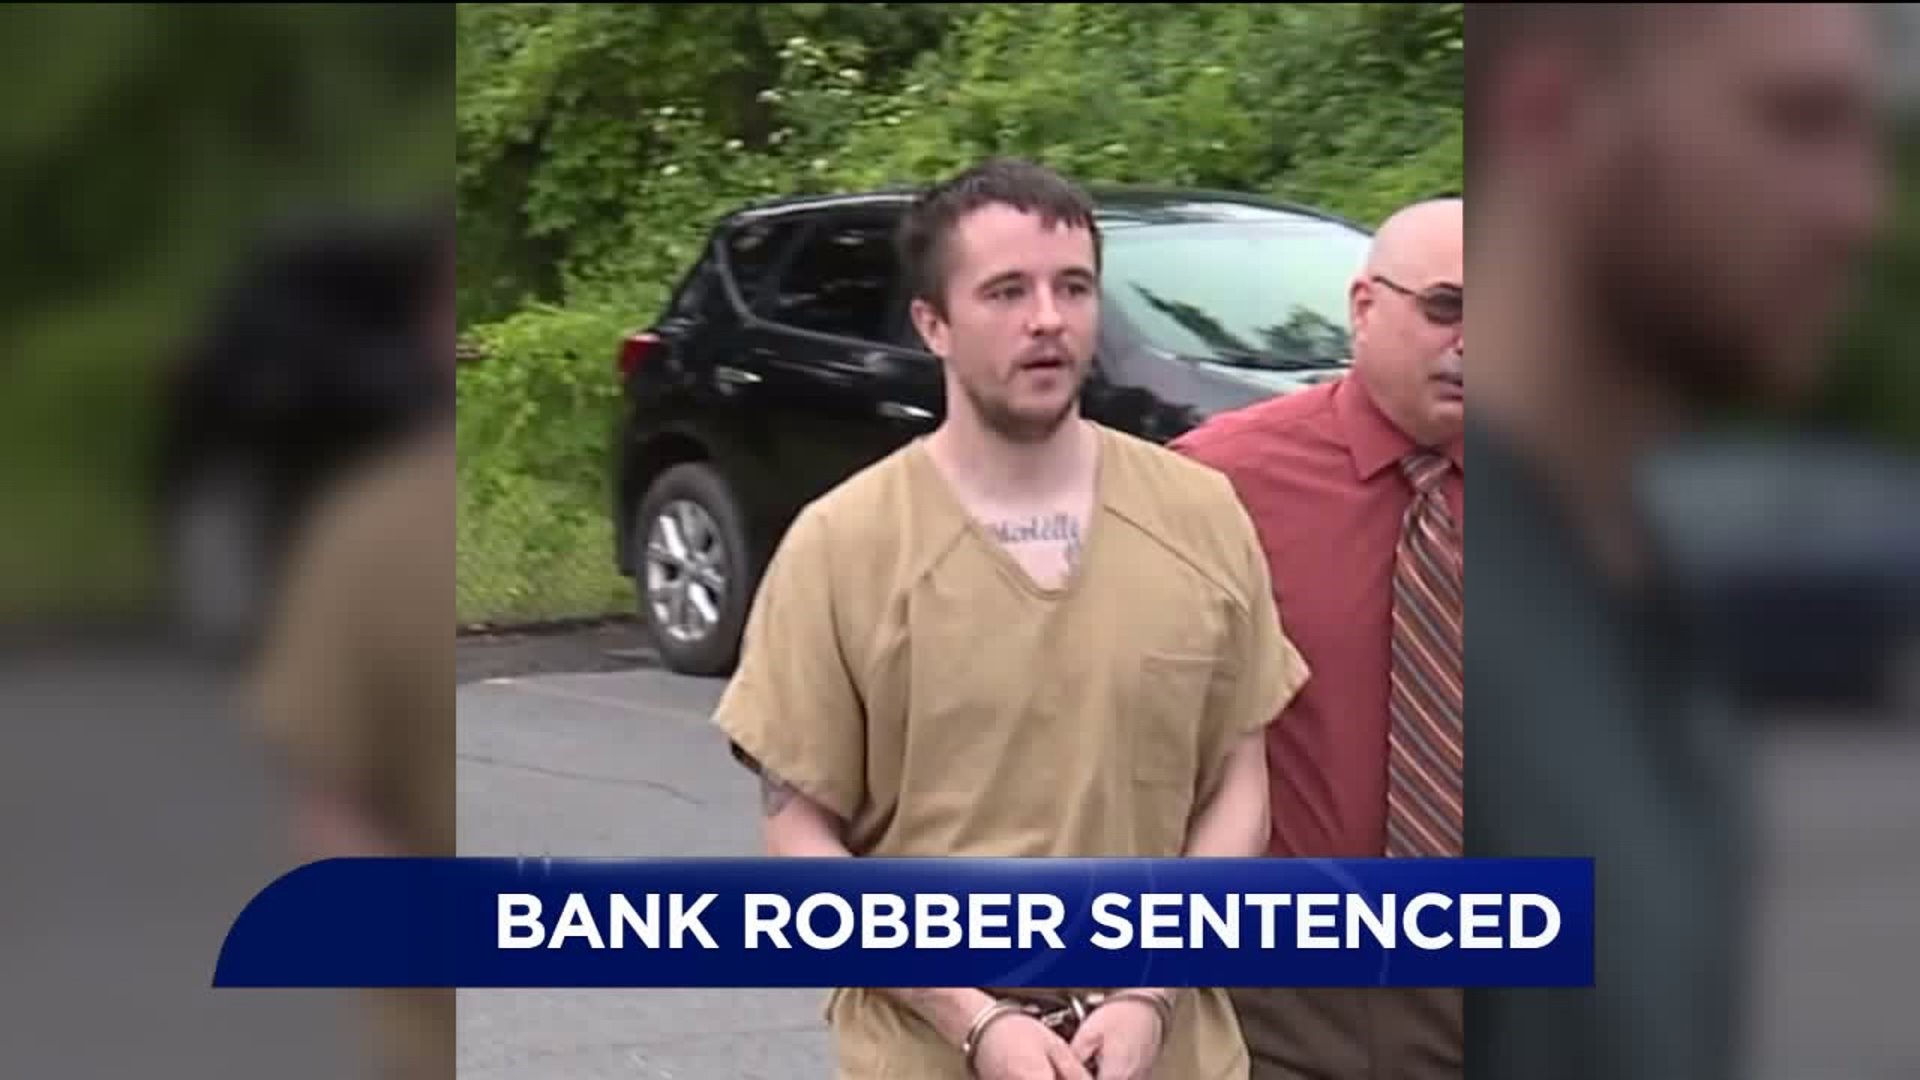 Bank Robber Sentenced in Luzerne County